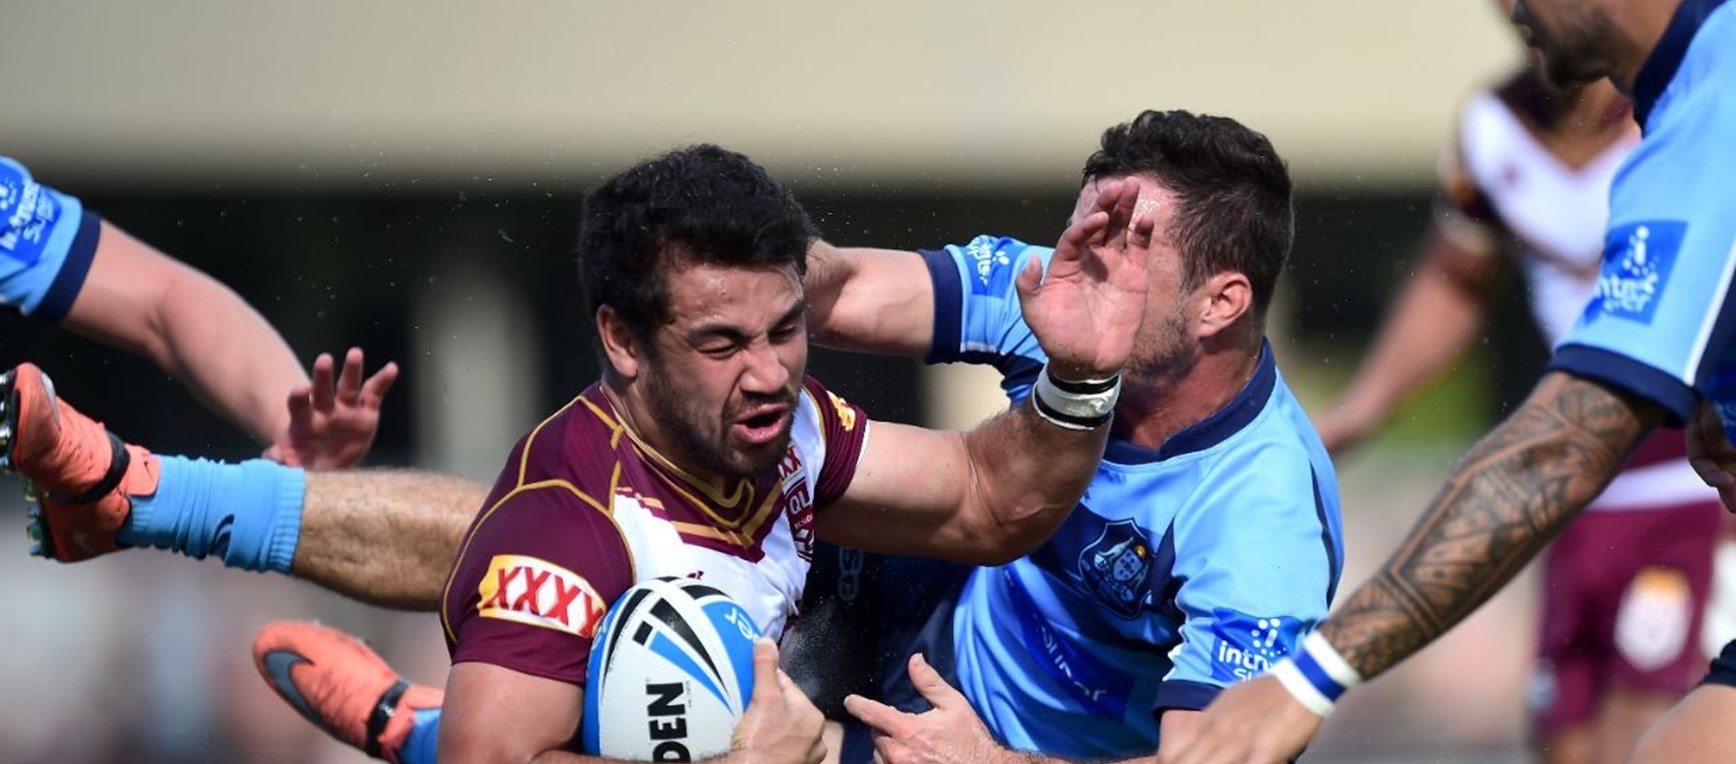 Gallery: Residents QLD v NSW